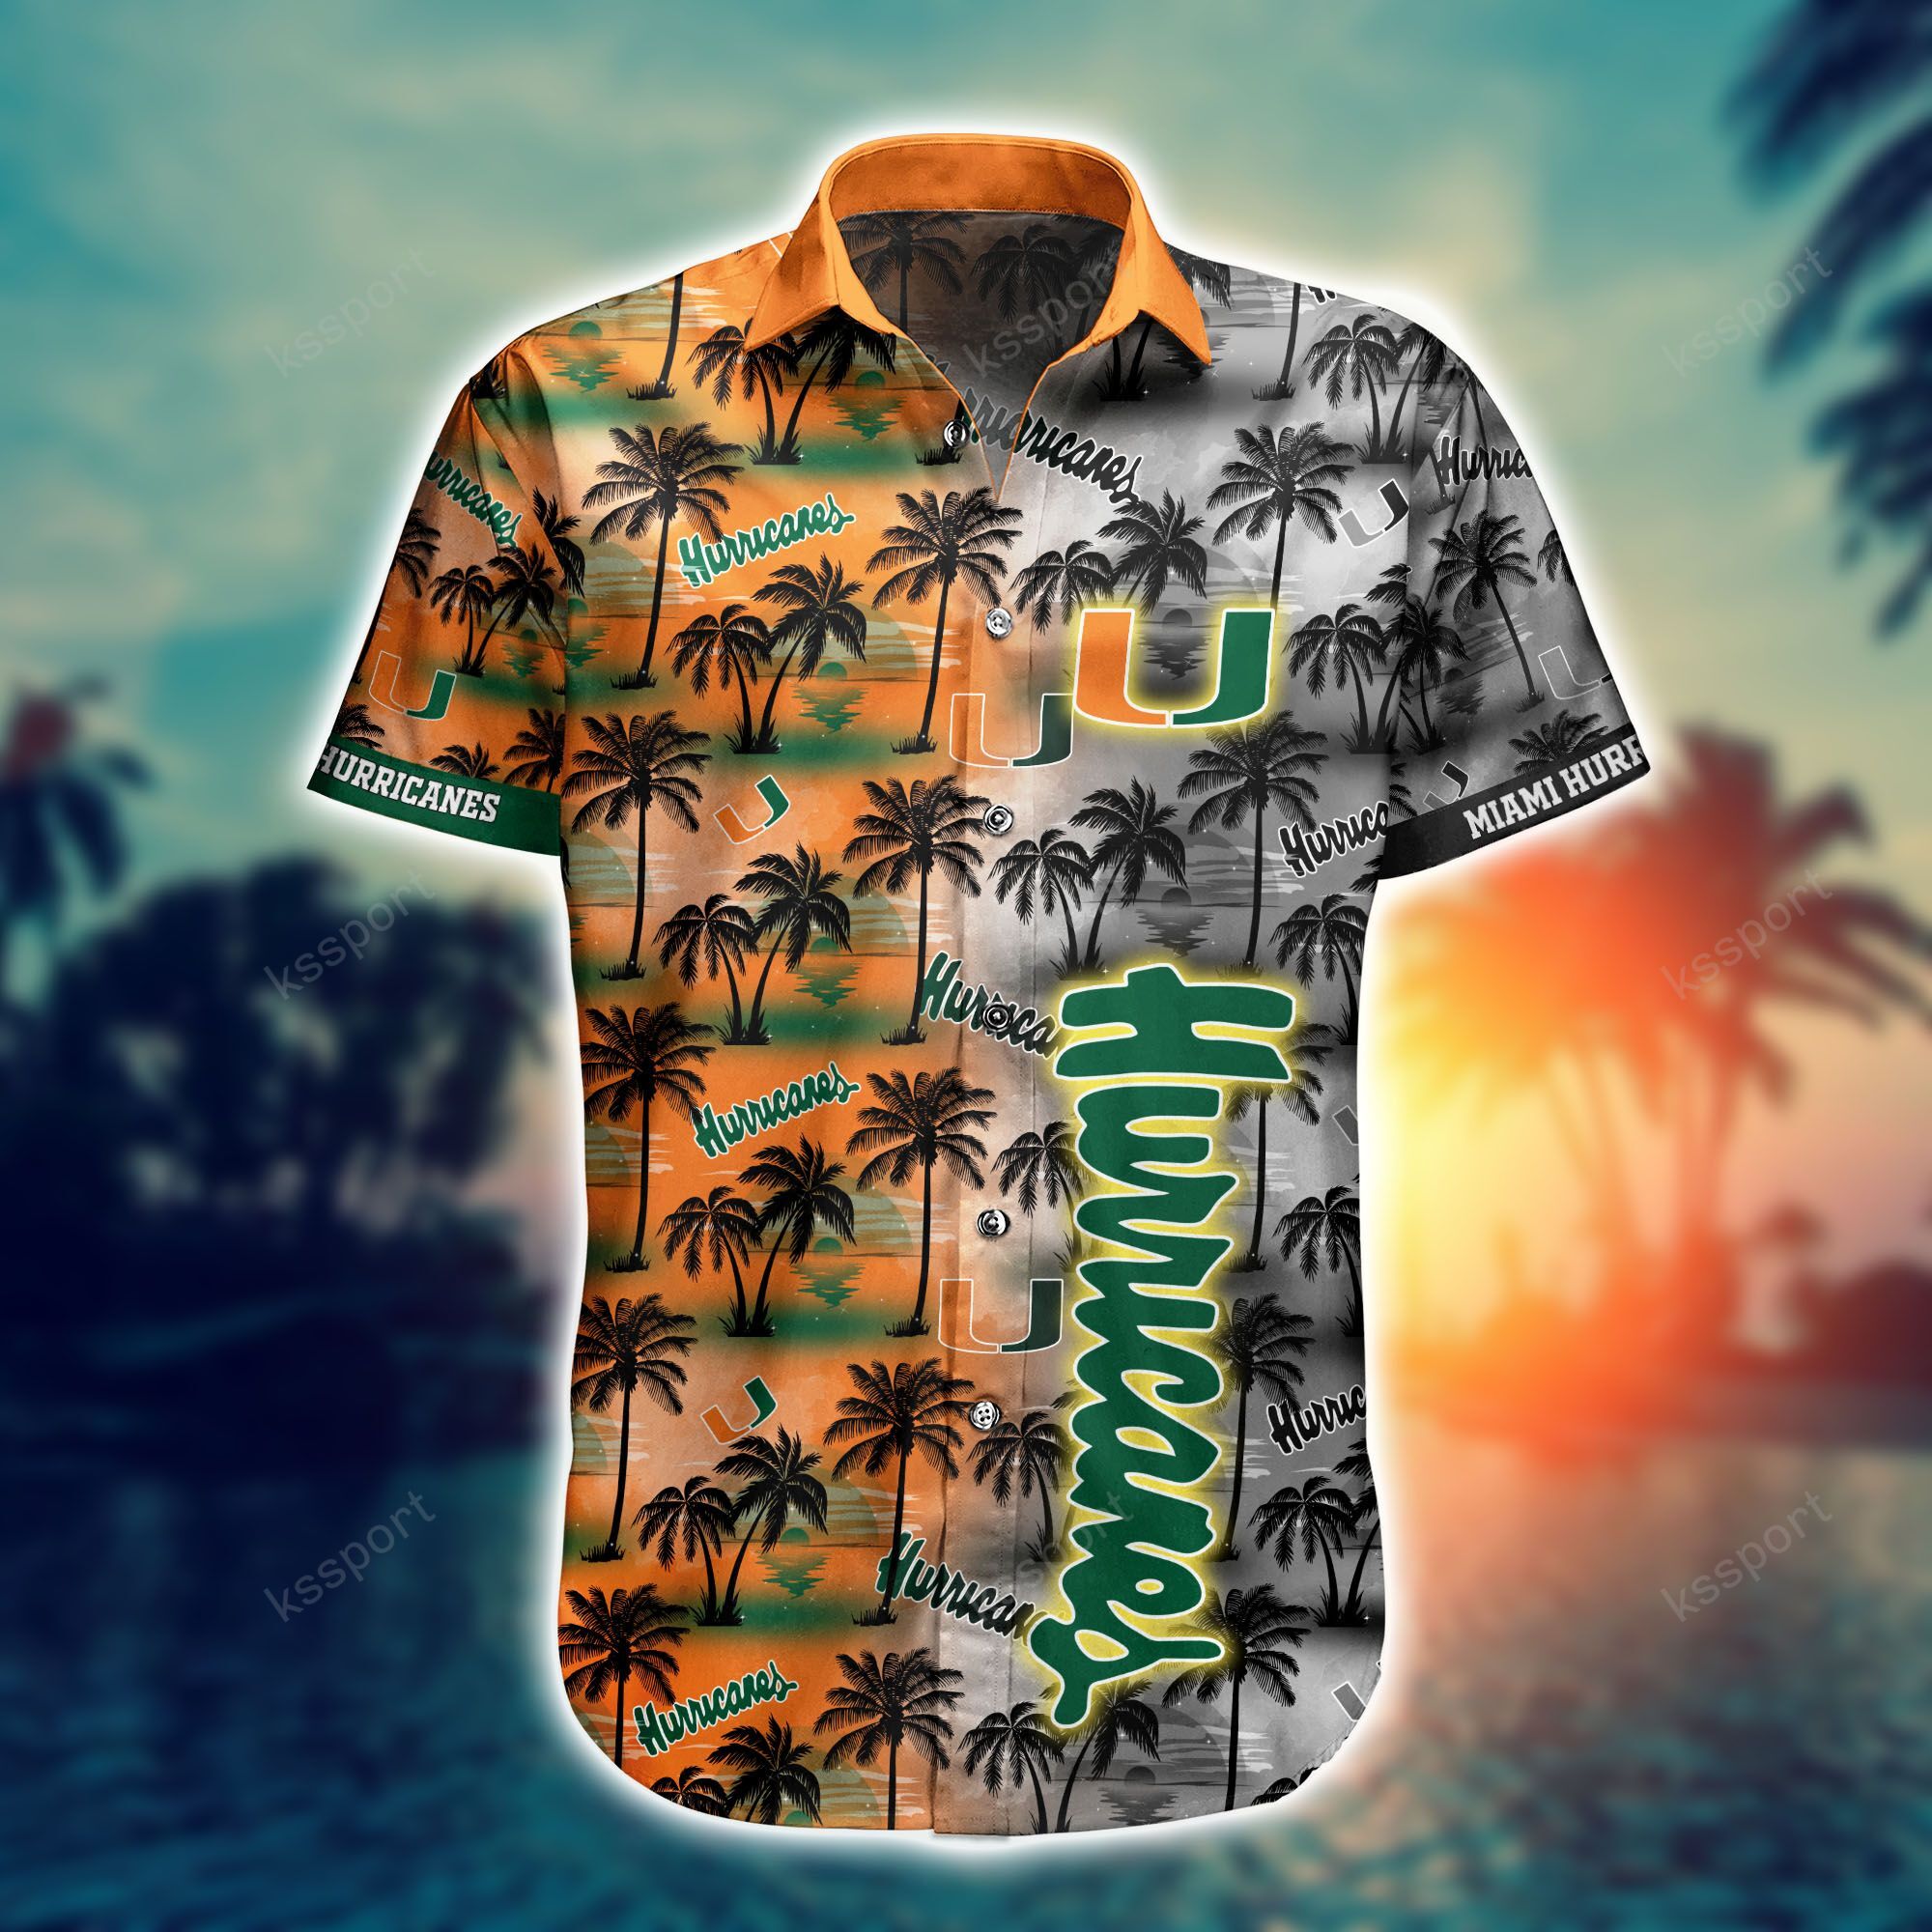 Top cool Hawaiian shirt 2022 - Make sure you get yours today before they run out! 148